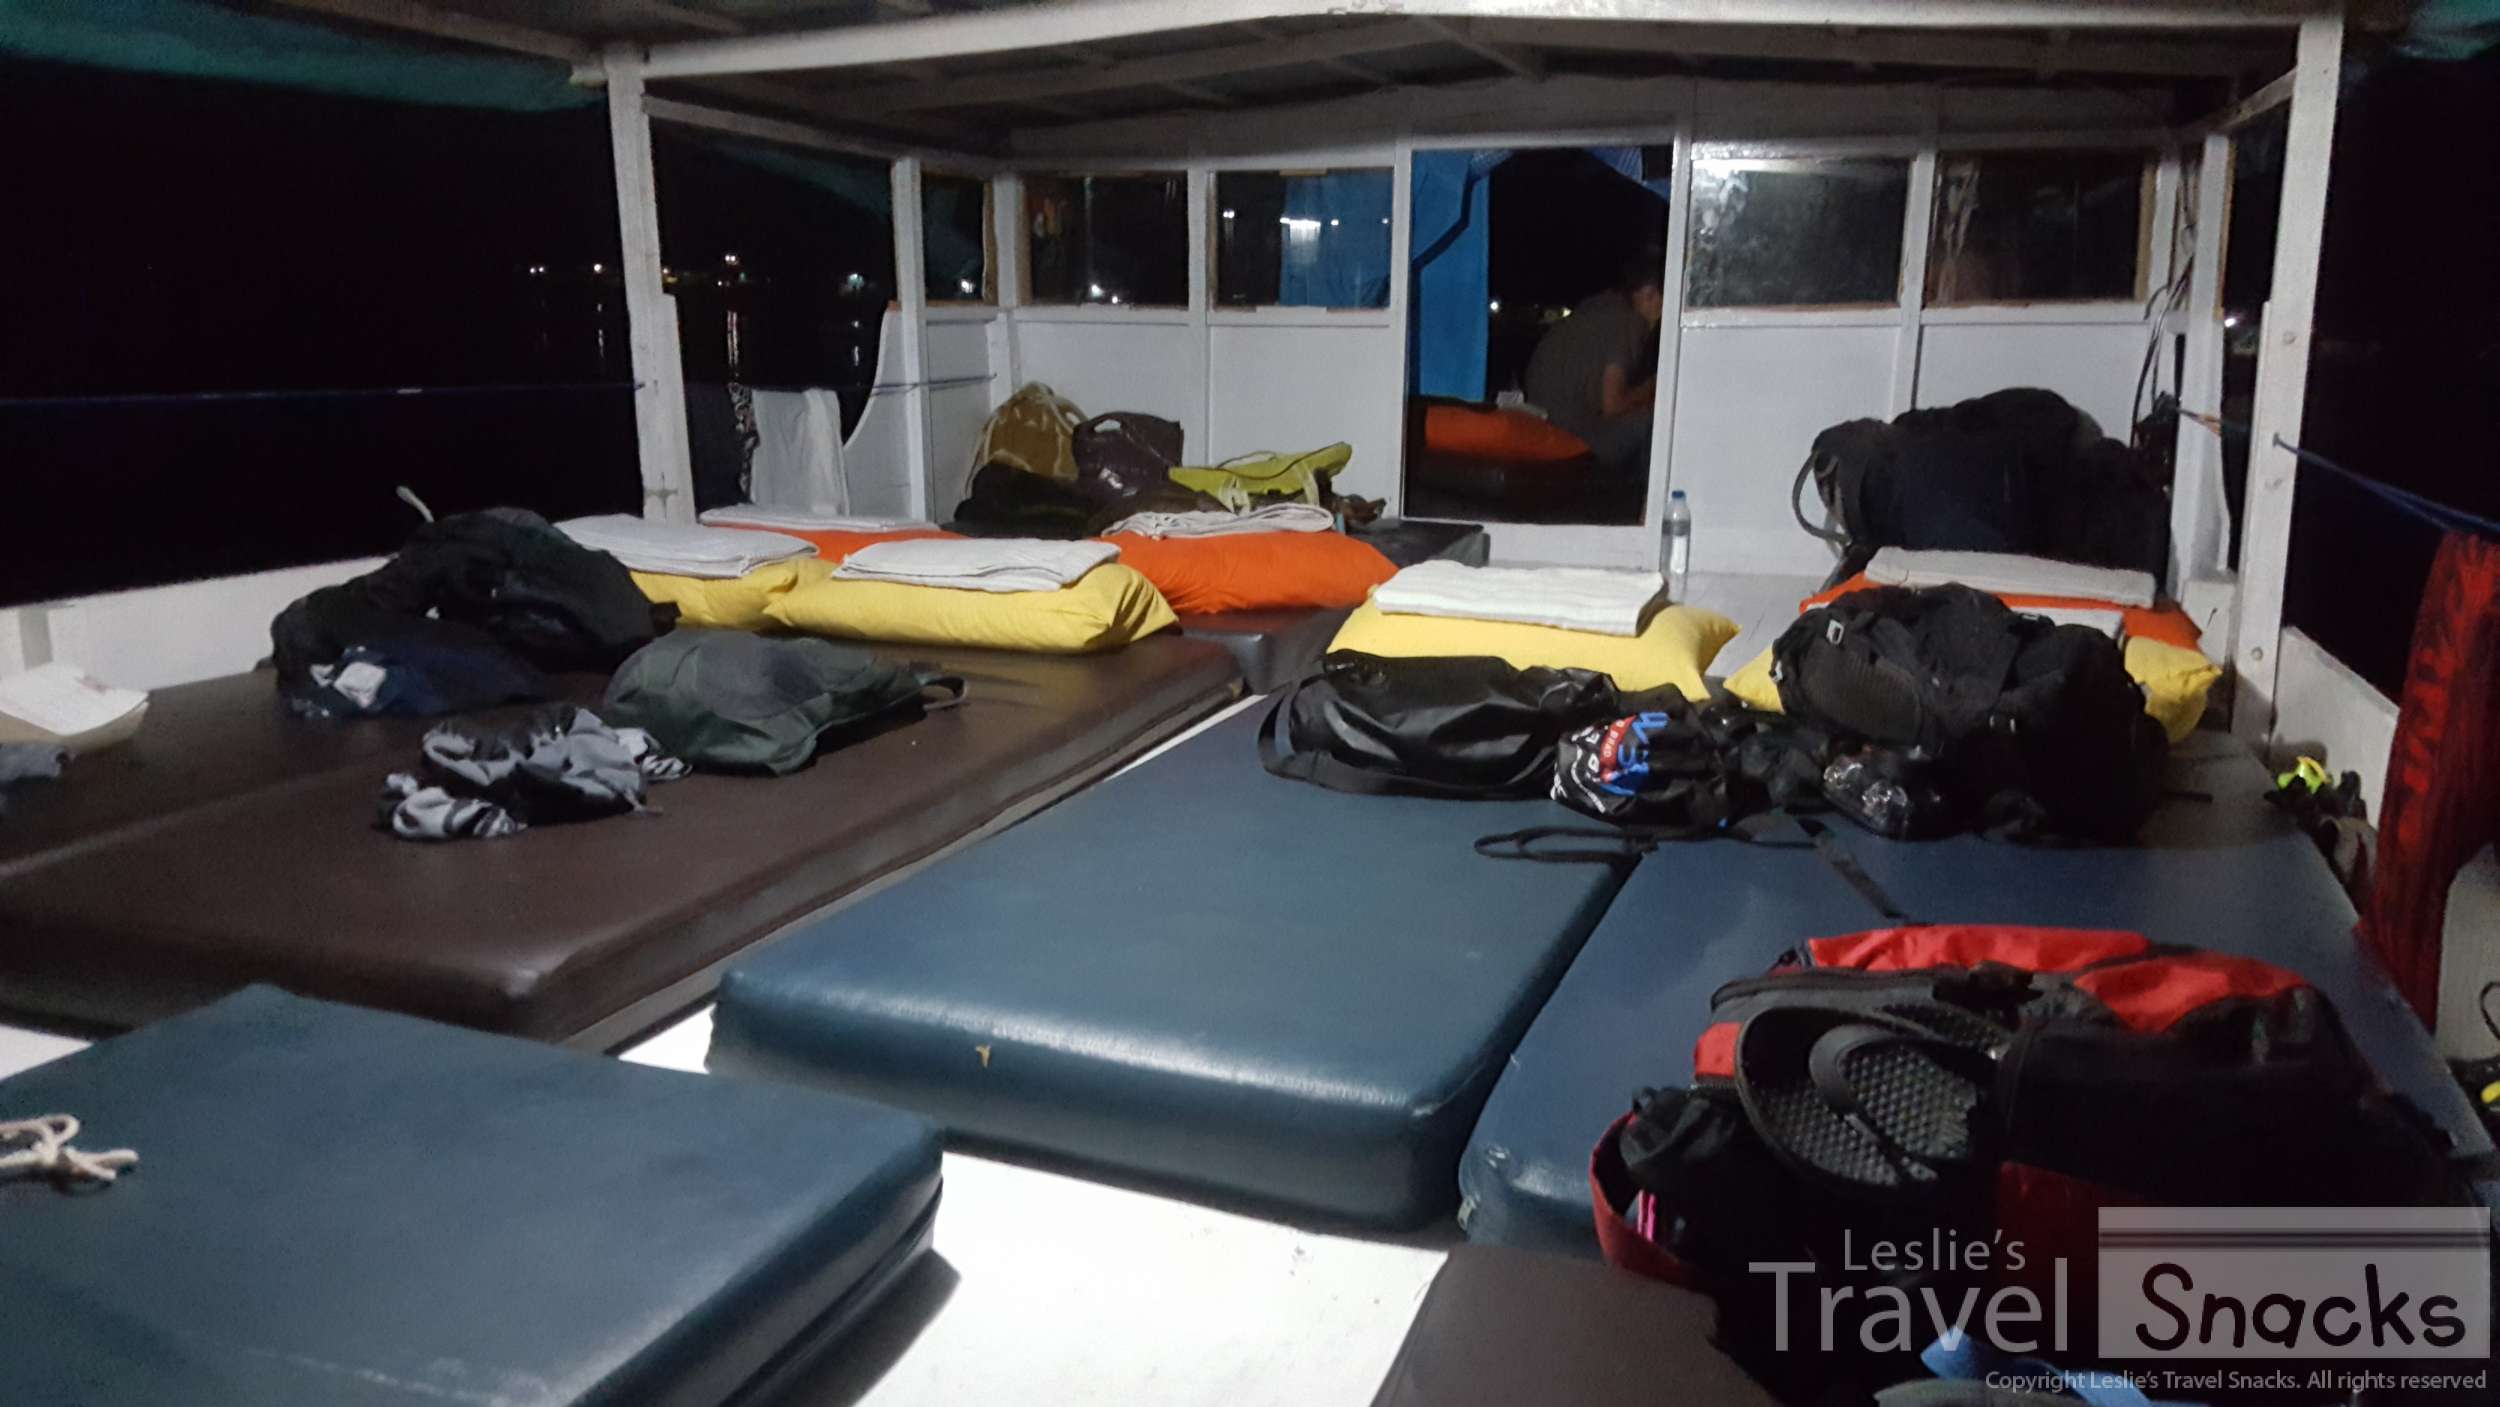 Sleeping on the deck of the boat was really quite comfortable. It gets a bit chilly but the pillow and flannel sheet do the trick.